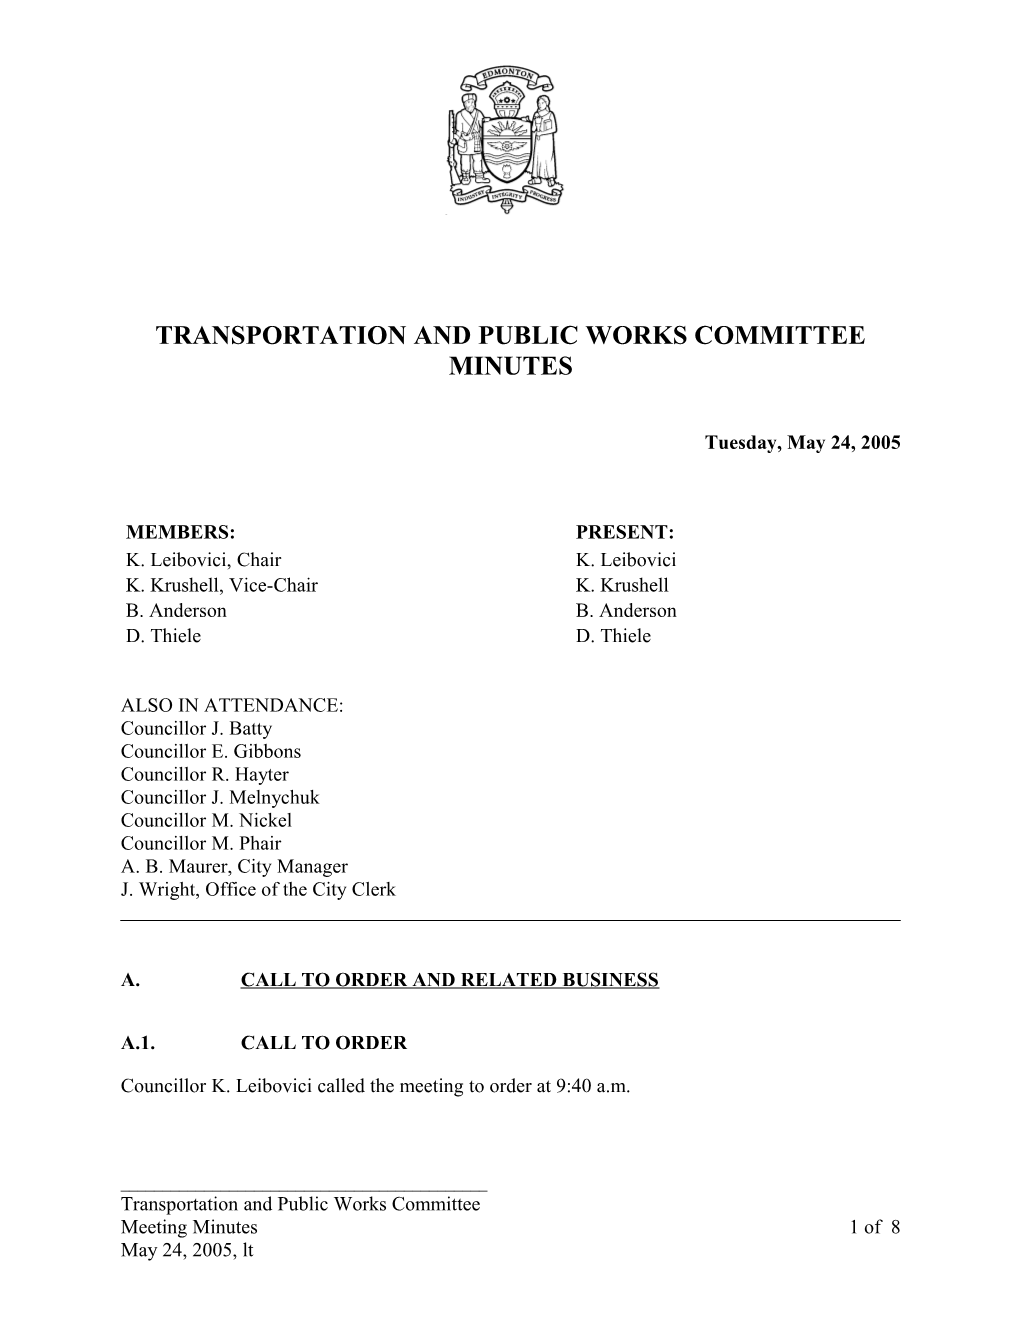 Minutes for Transportation and Public Works Committee May 24, 2005 Meeting